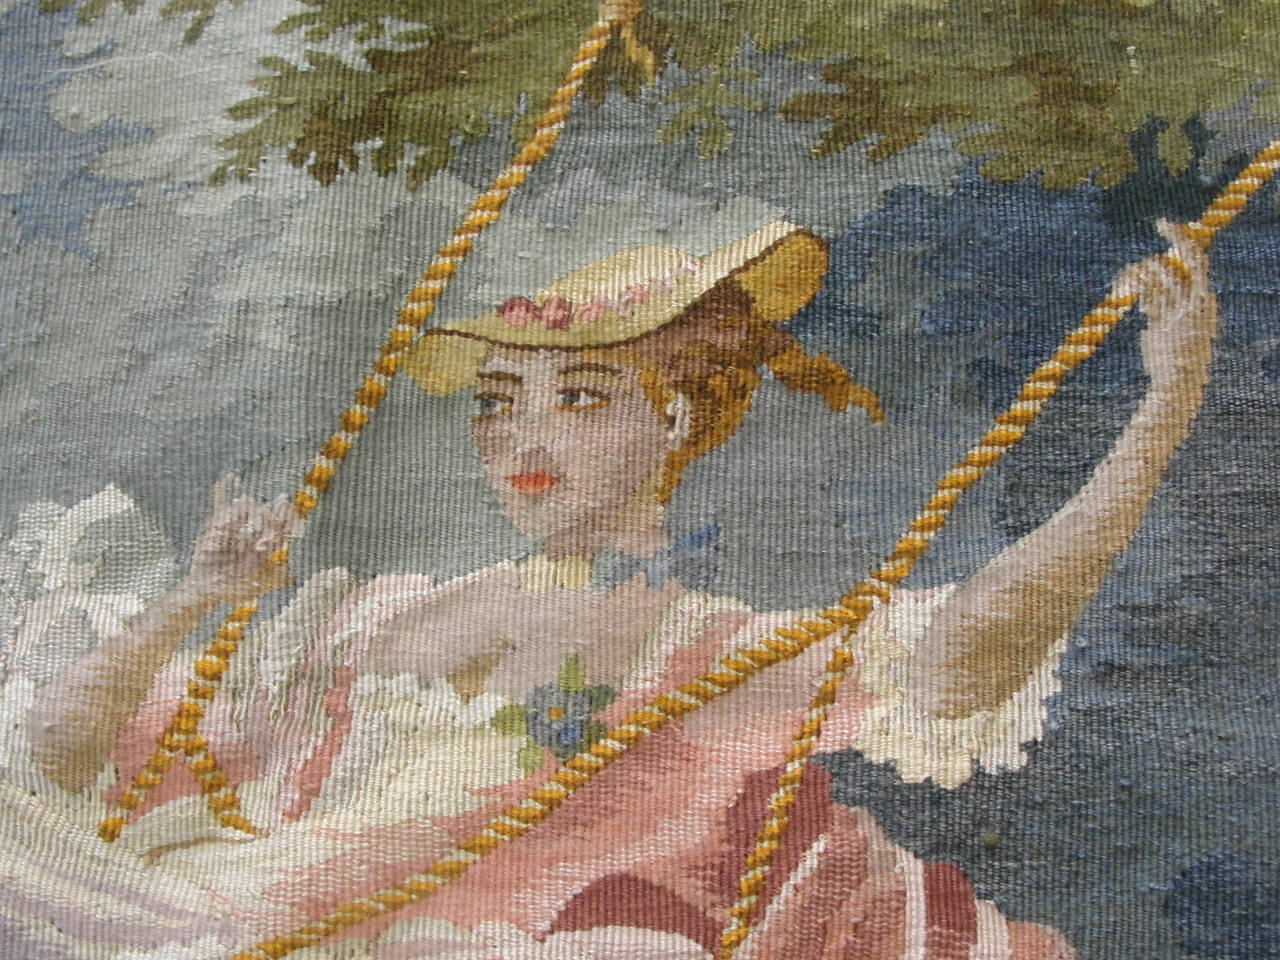 Aubusson French tapestry, measures: 2'1